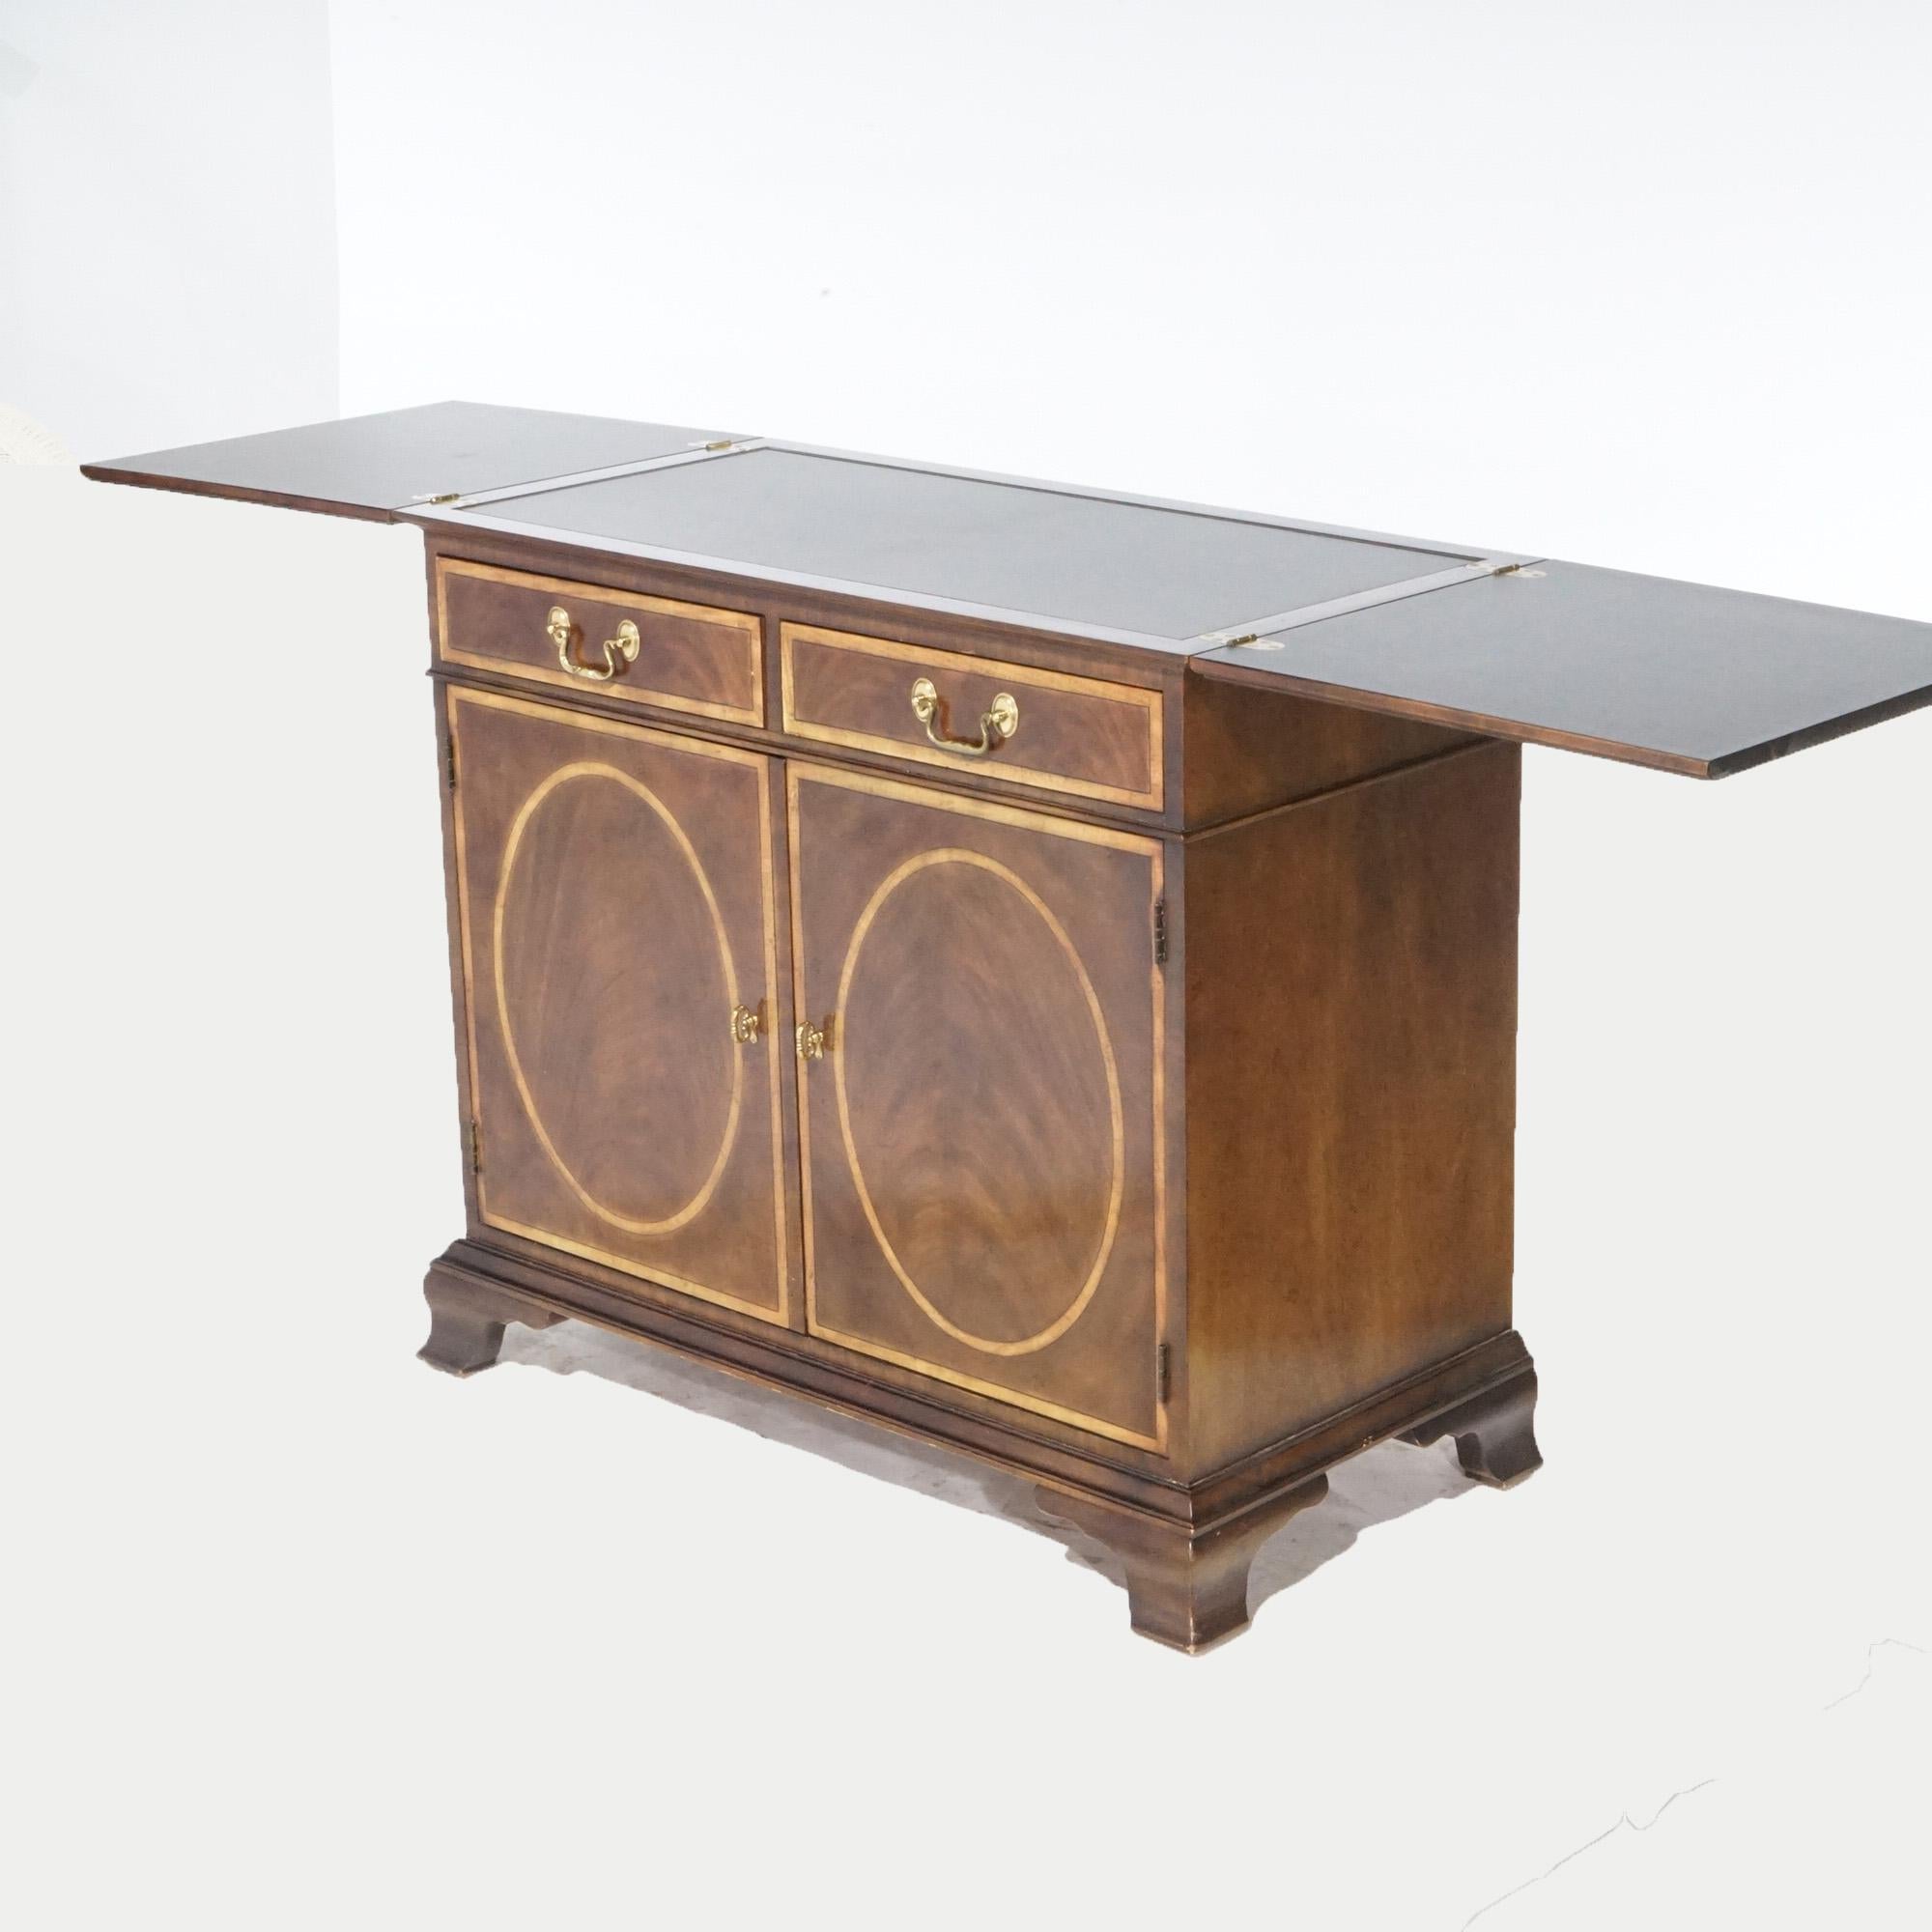 Regency Style Mahogany Inlaid & Banded Credenza Server by Henredon, 20th Century For Sale 4